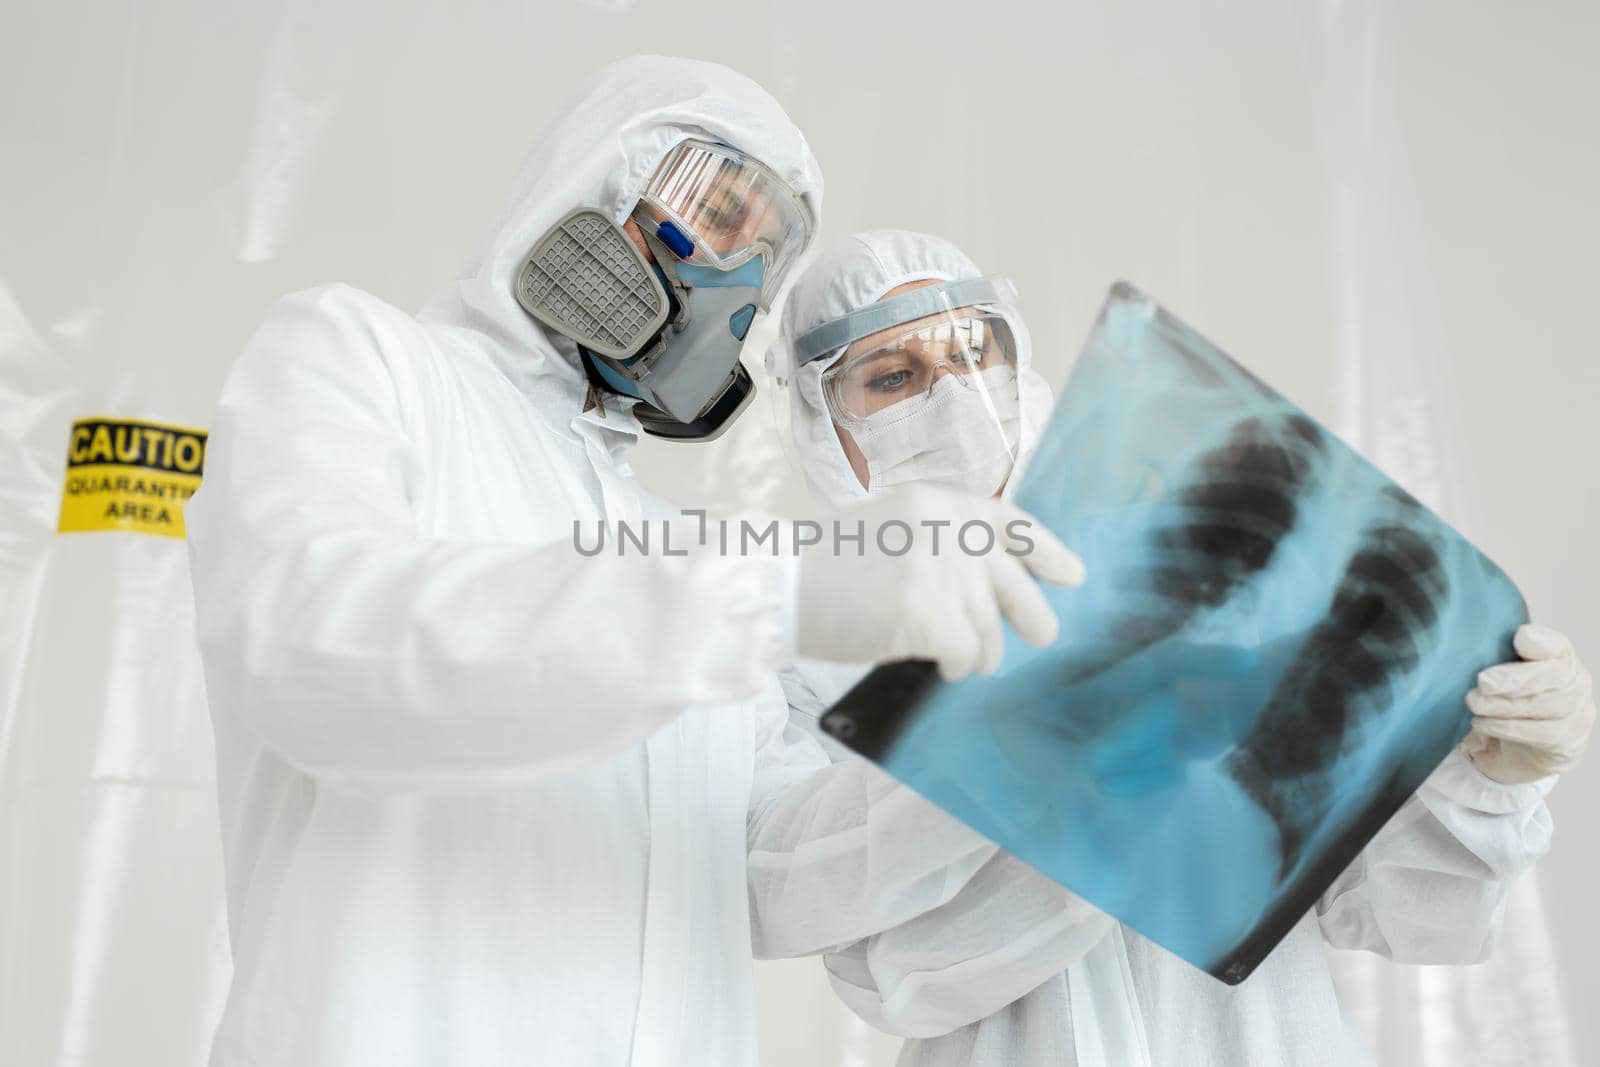 Doctors Epidemiologists examine x-ray for pneumonia of a Covid-19 patient. Coronavirus concept. by StudioPeace